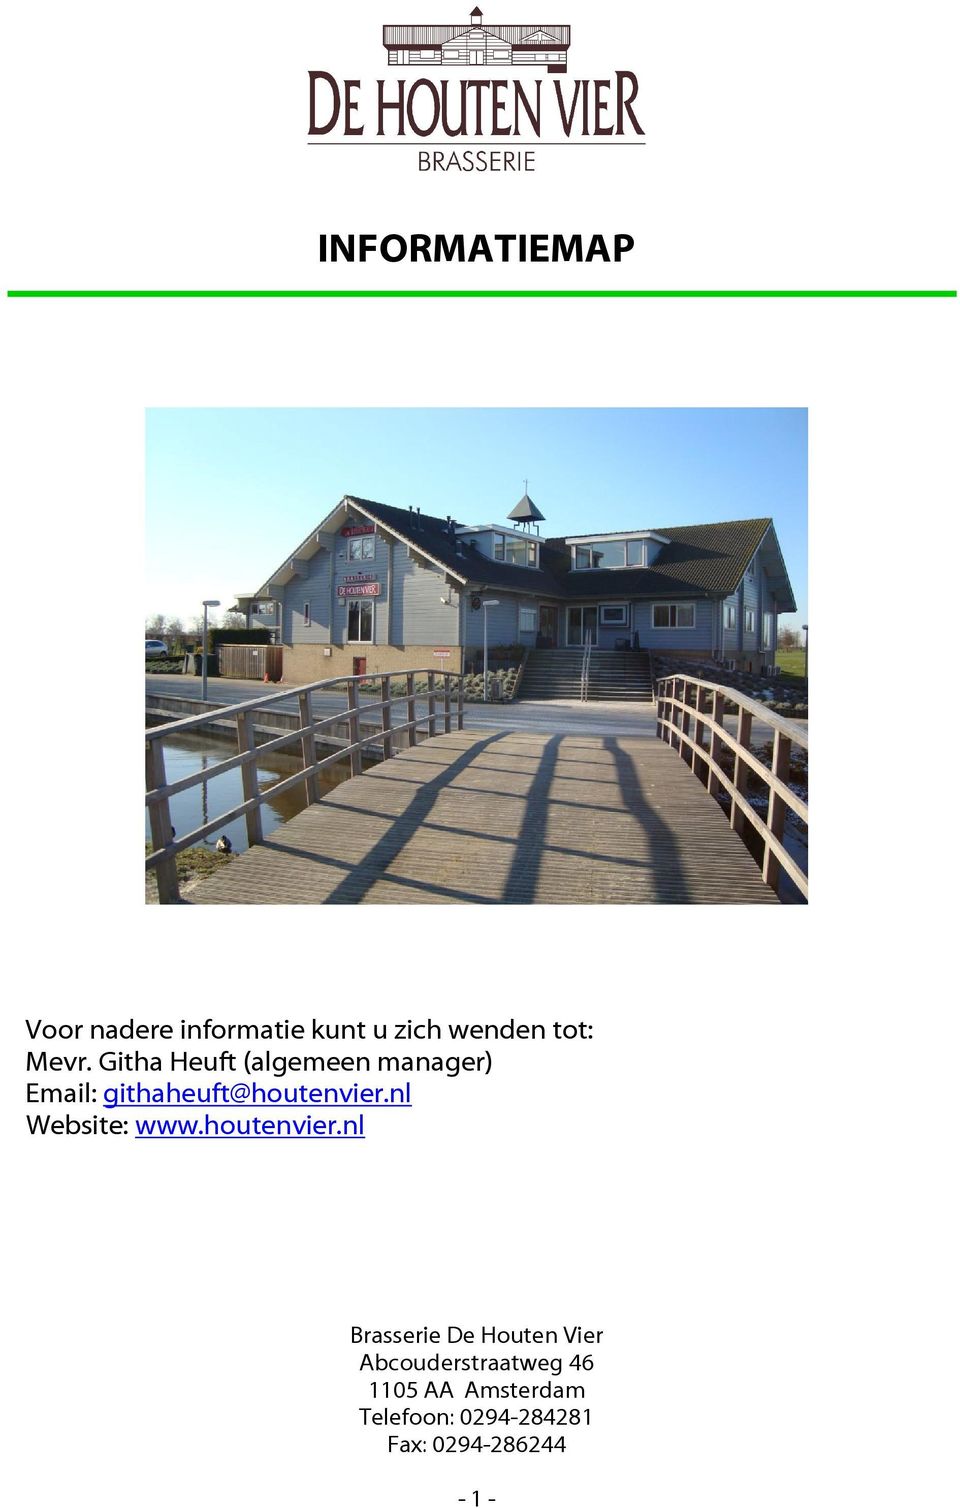 Githa Heuft (algemeen manager) Email: